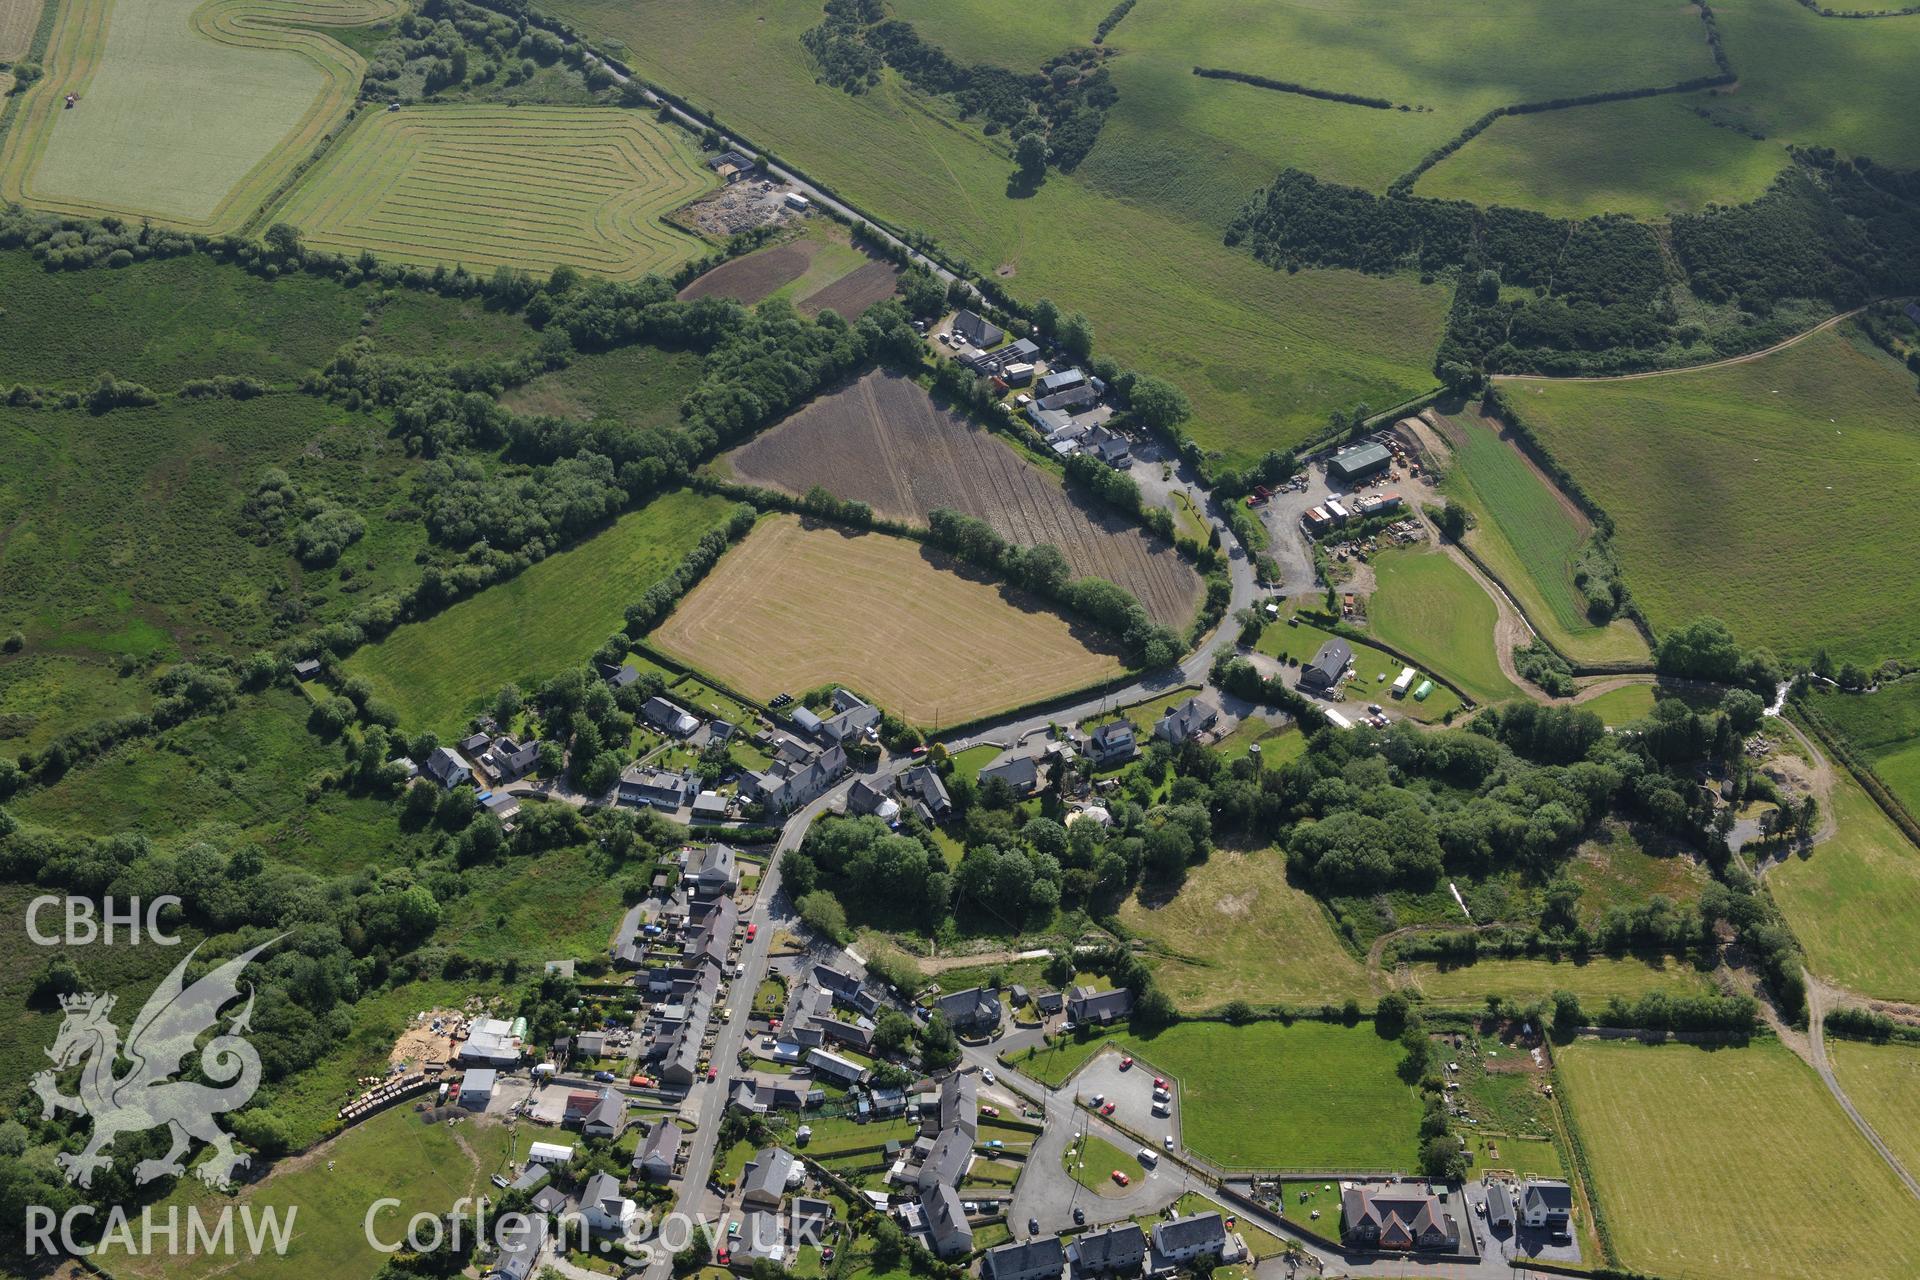 The village of Rhyd-y-Clafdu with the village school visible at the bottom right of the image. Oblique aerial photograph taken during the Royal Commission's programme of archaeological aerial reconnaissance by Toby Driver on 23rd June 2015.